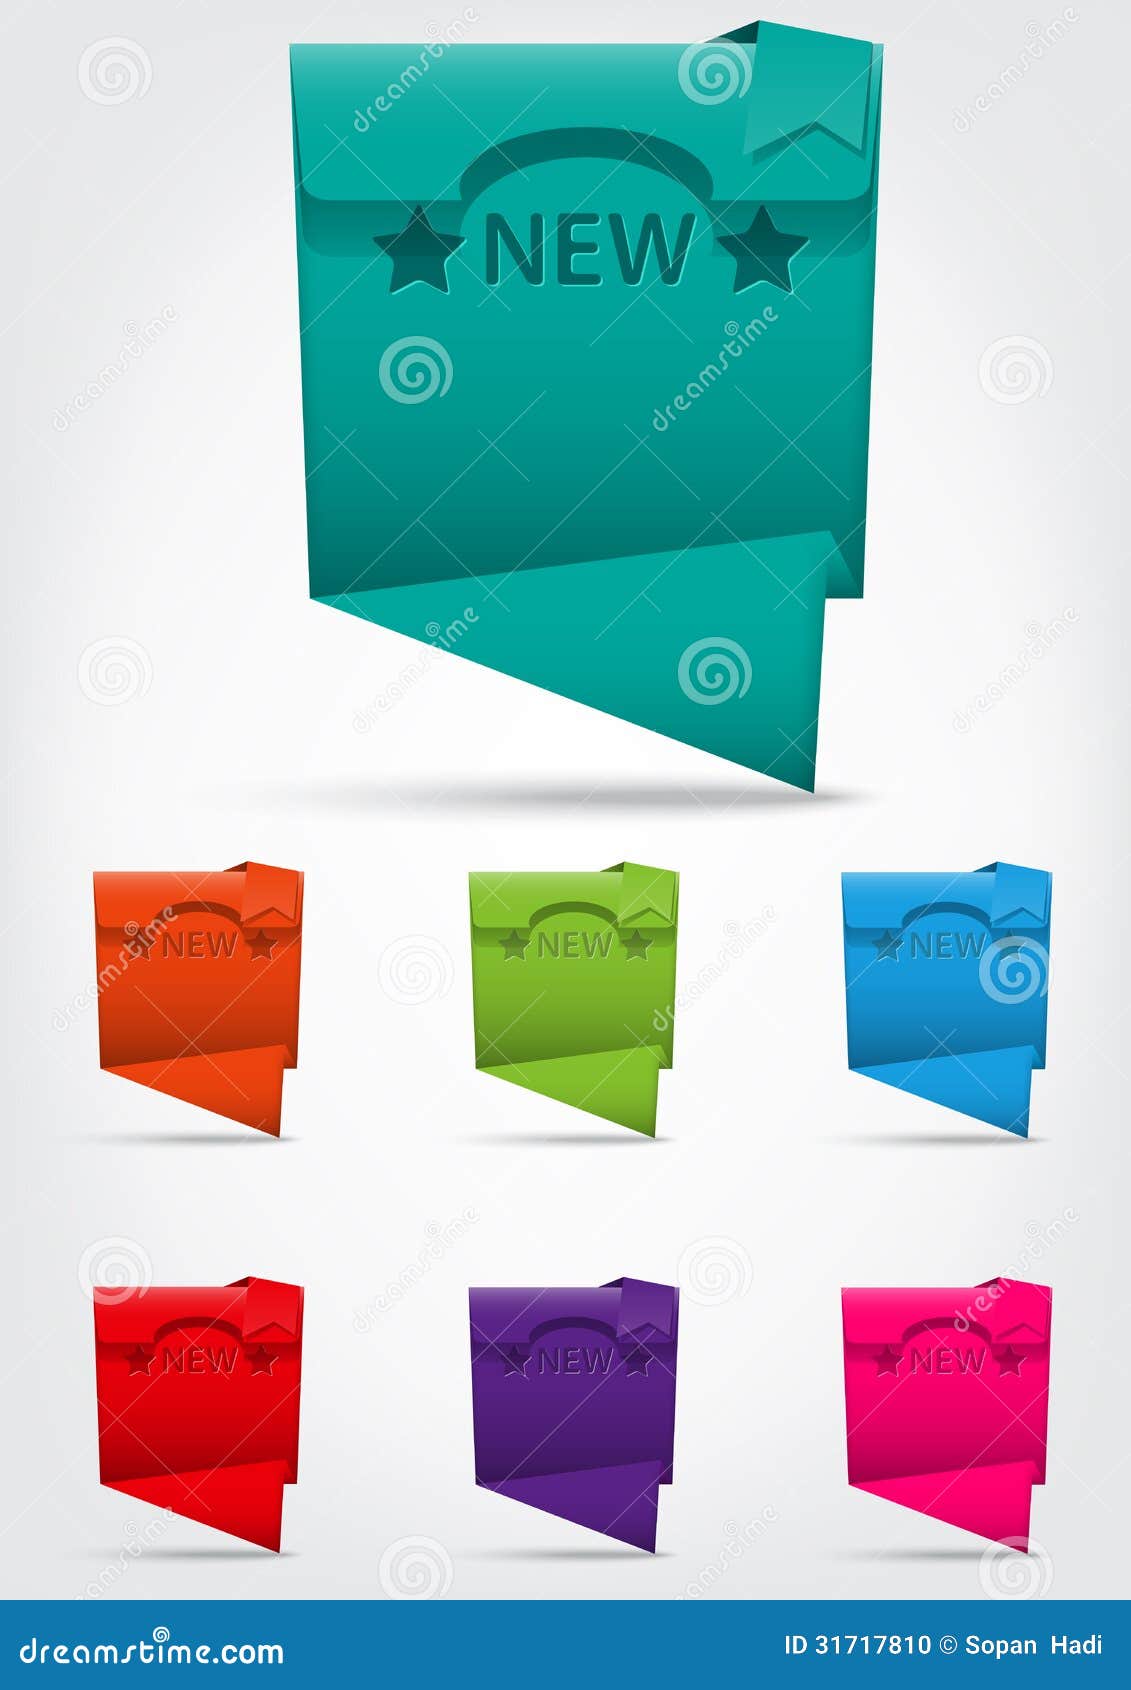  - set-colorful-banner-new-text-star-illustration-gray-31717810